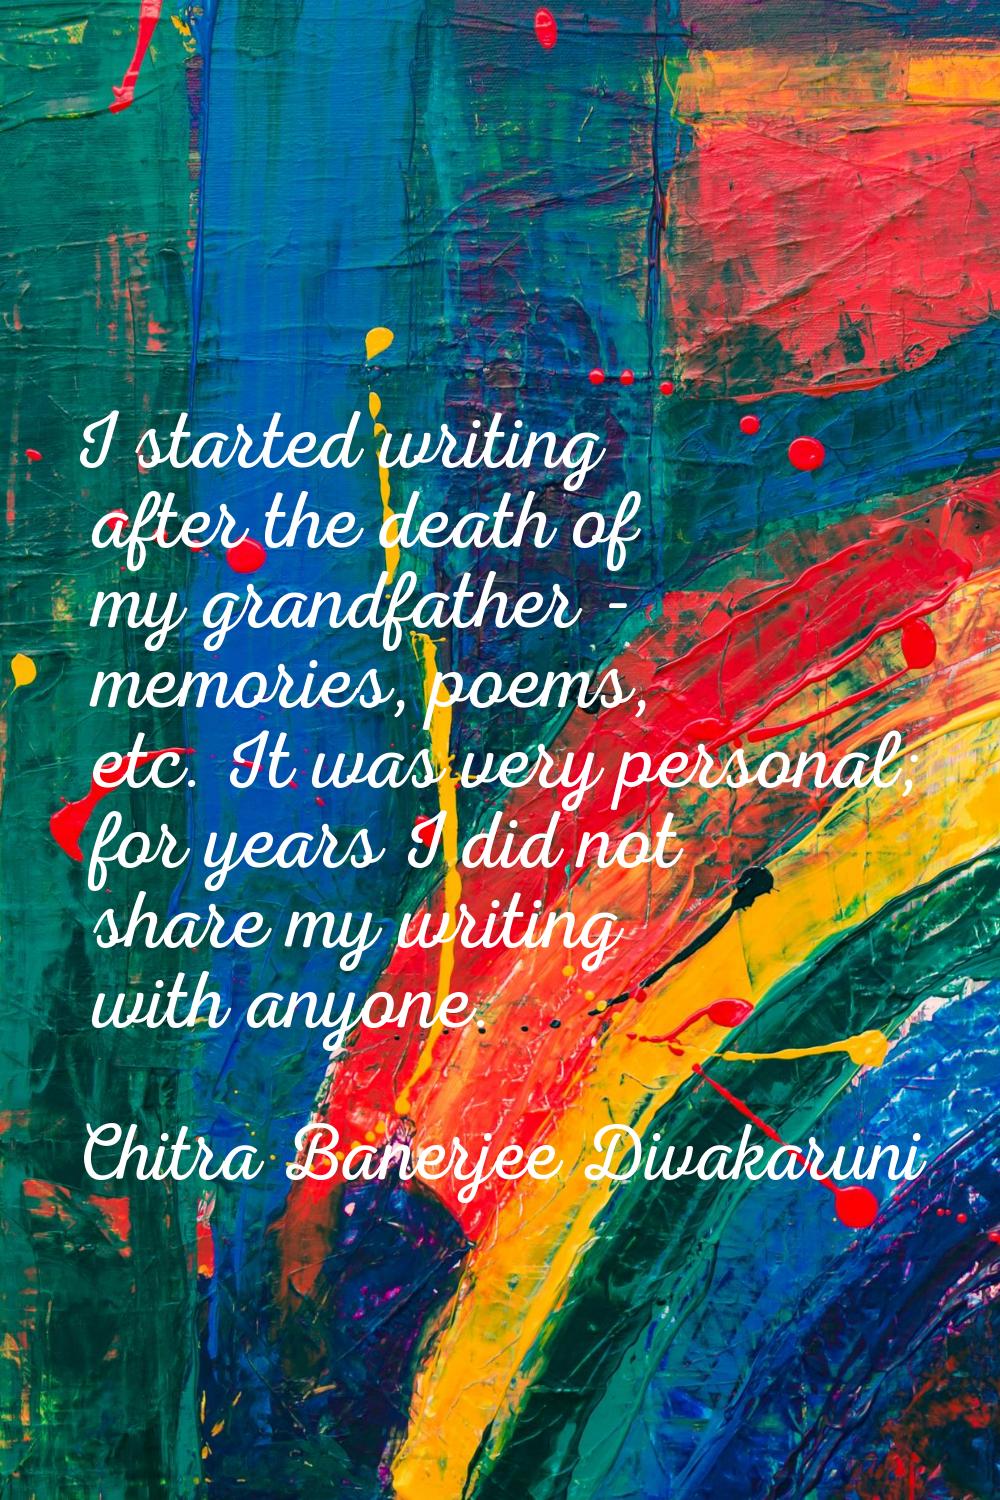 I started writing after the death of my grandfather - memories, poems, etc. It was very personal; f